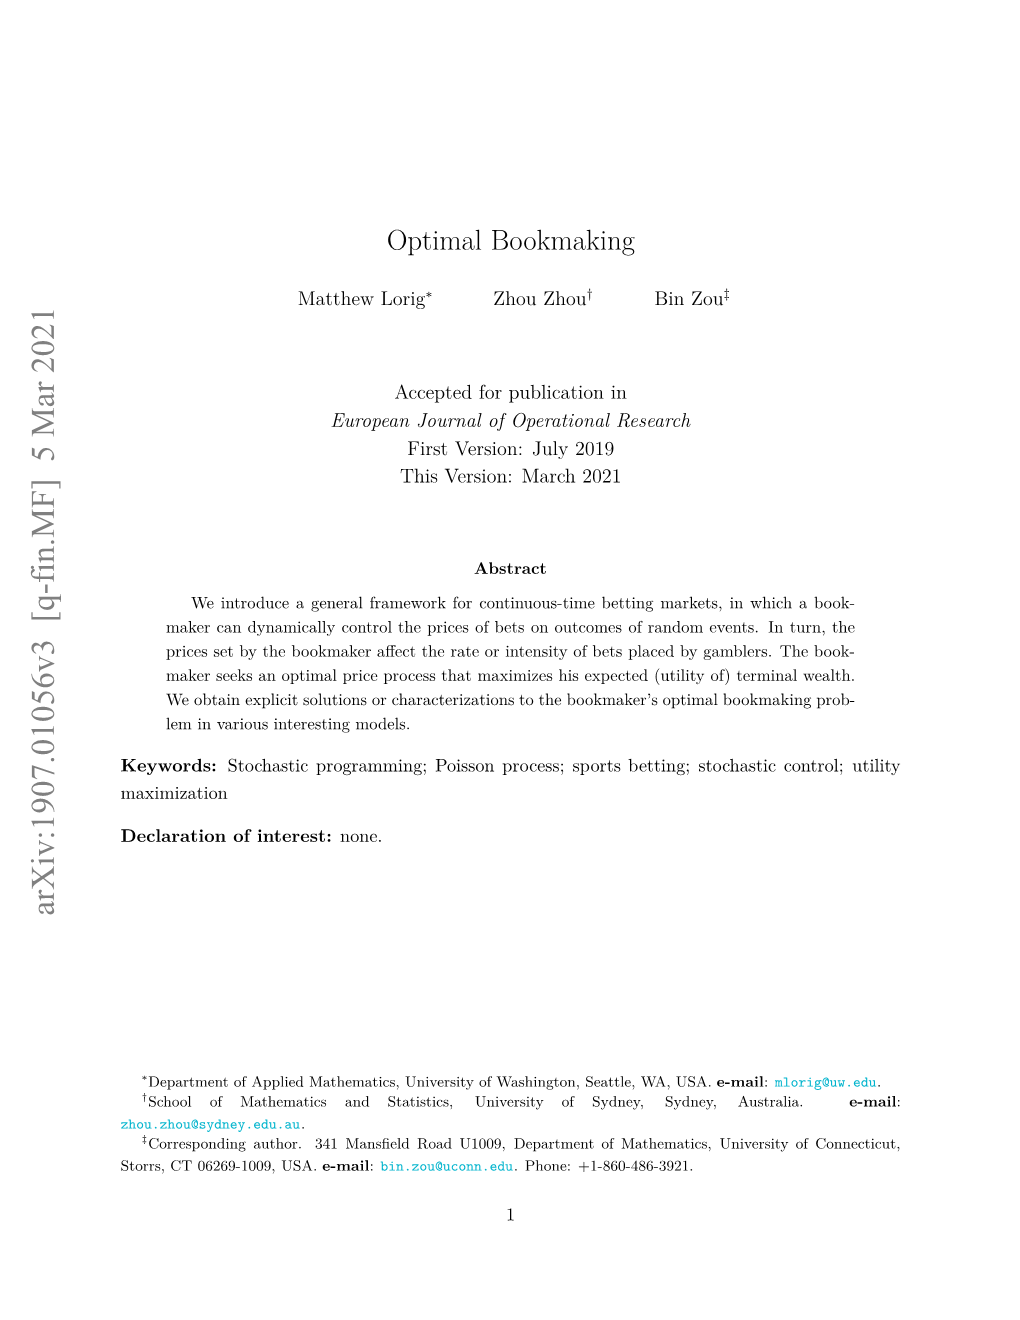 Optimal Bookmaking, Which Takes Into Account the Situations Described Above